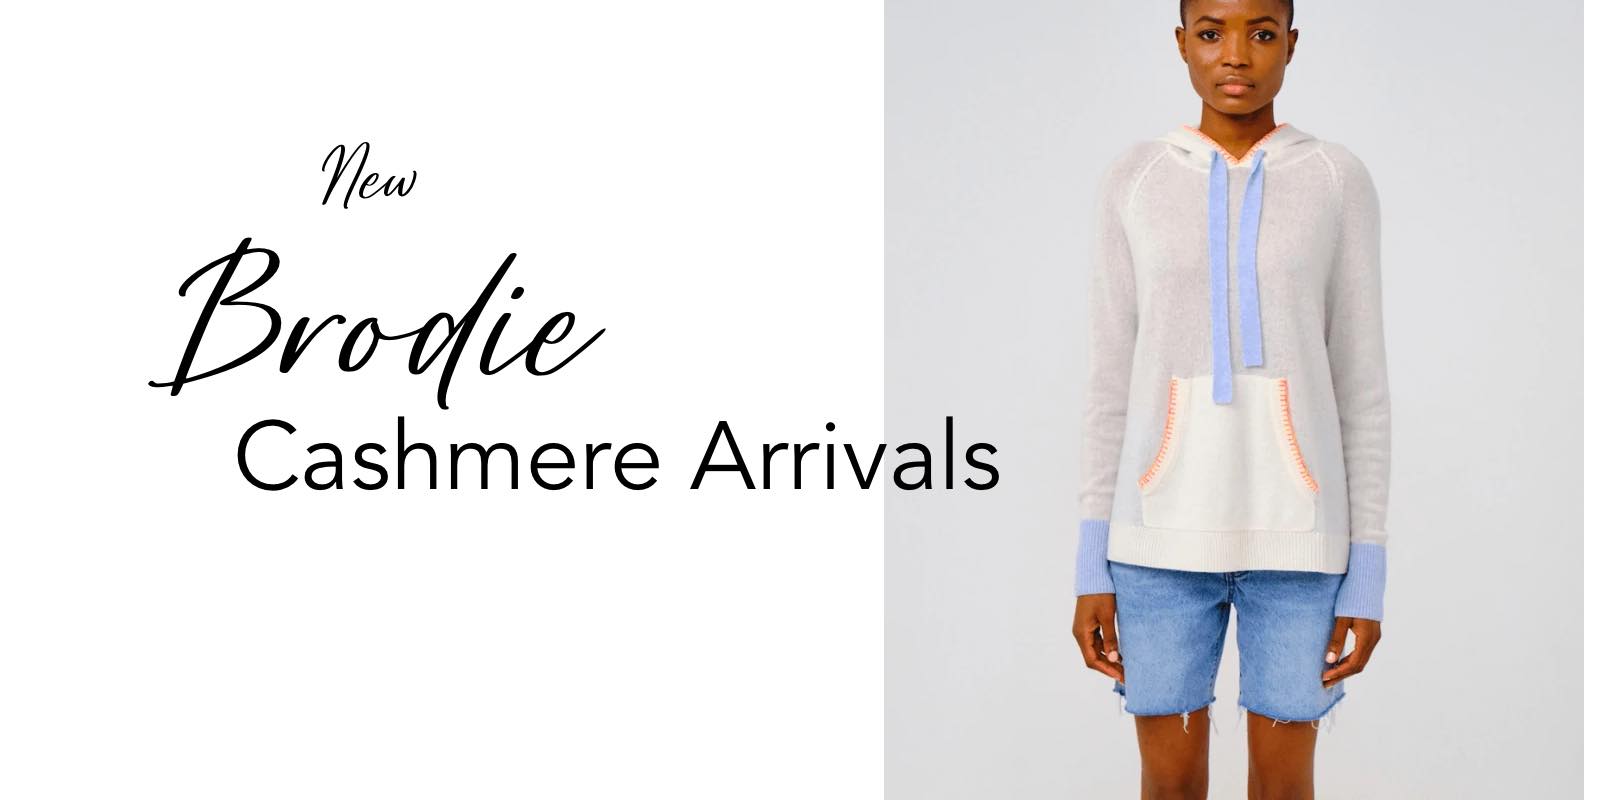 New Brodie Cashmere Arrivals - Perfect for Spring Days Ahead!